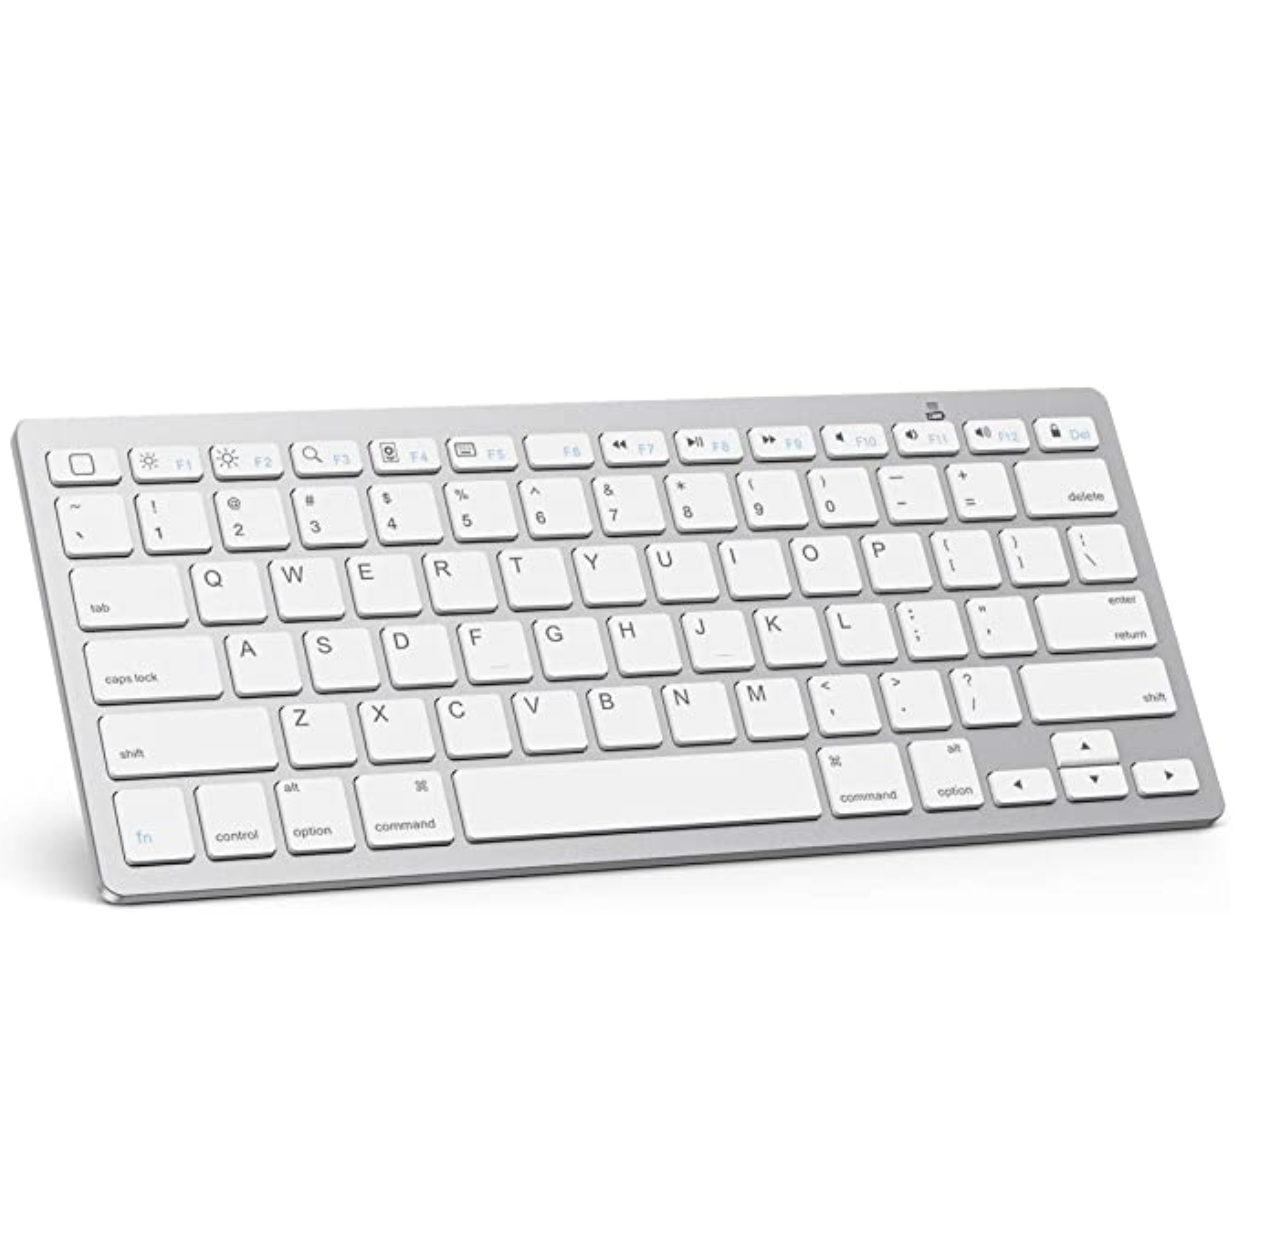 Omoton Wireless Cable-Free Bluetooth Keyboard For Mac & Windows